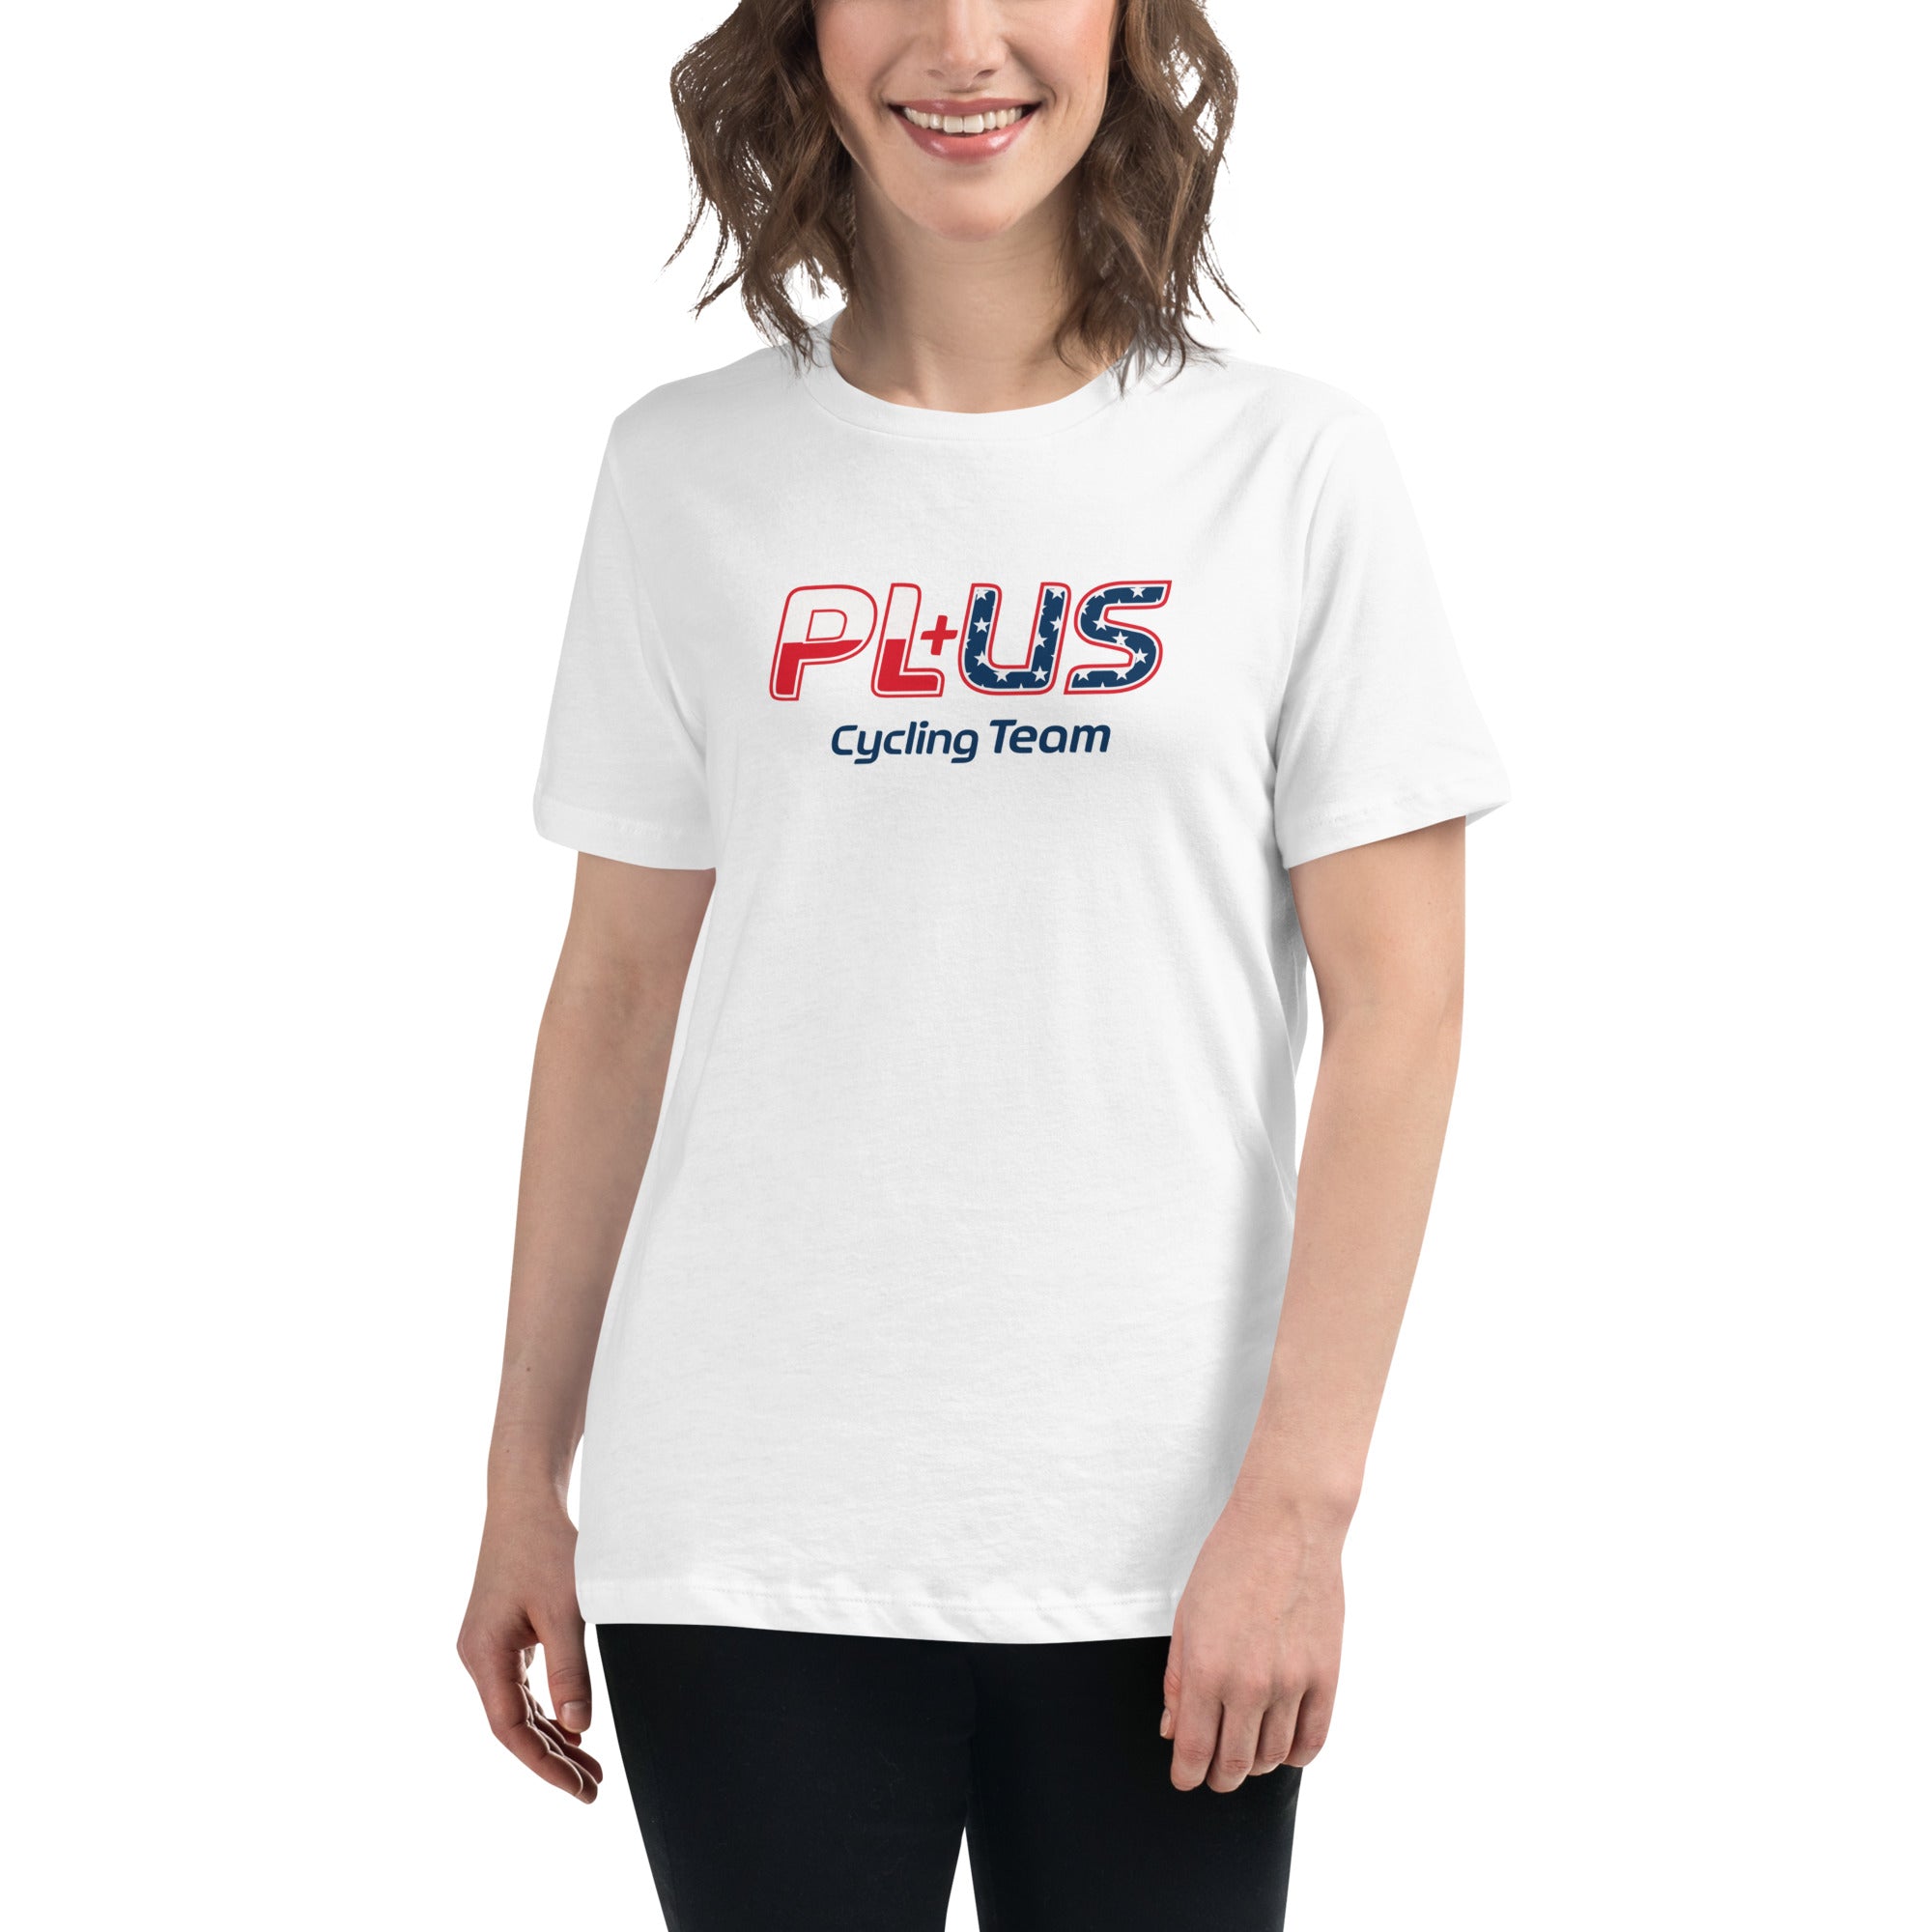 PLUS Cycling Team Women's Relaxed T-Shirt